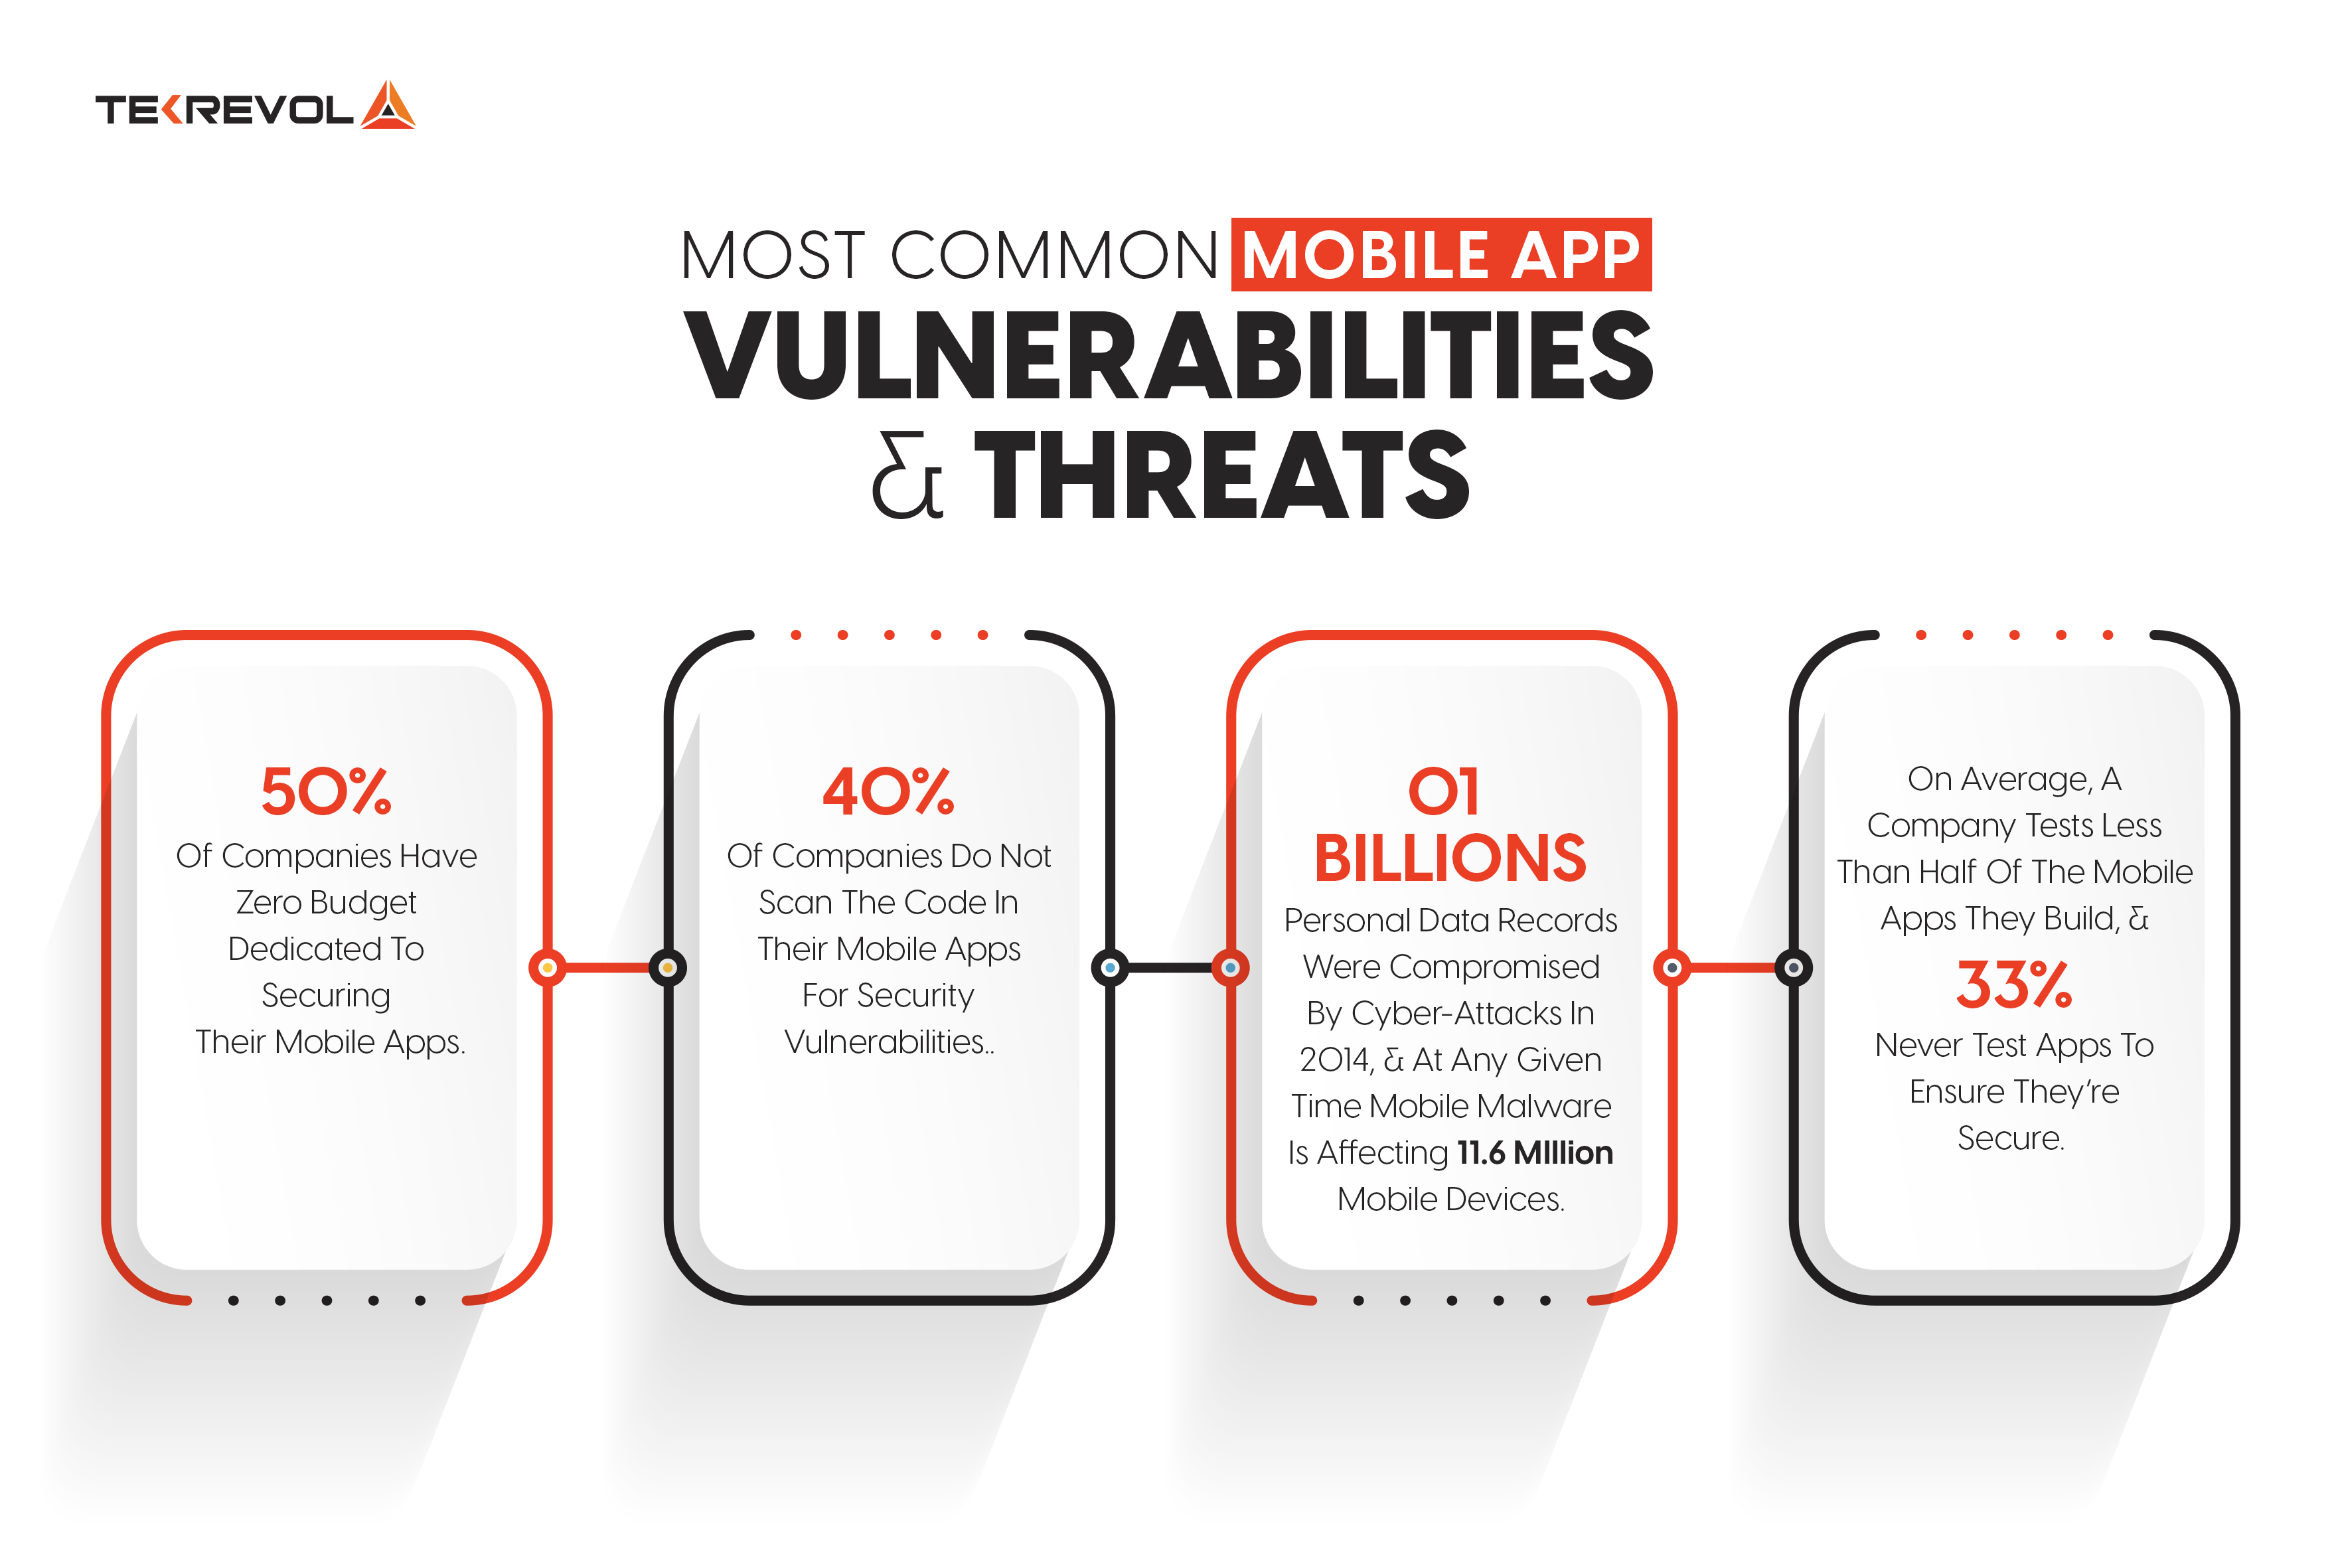 Protecting Your Identity and Data - Common Mobile App Vulnerabilities & Threats